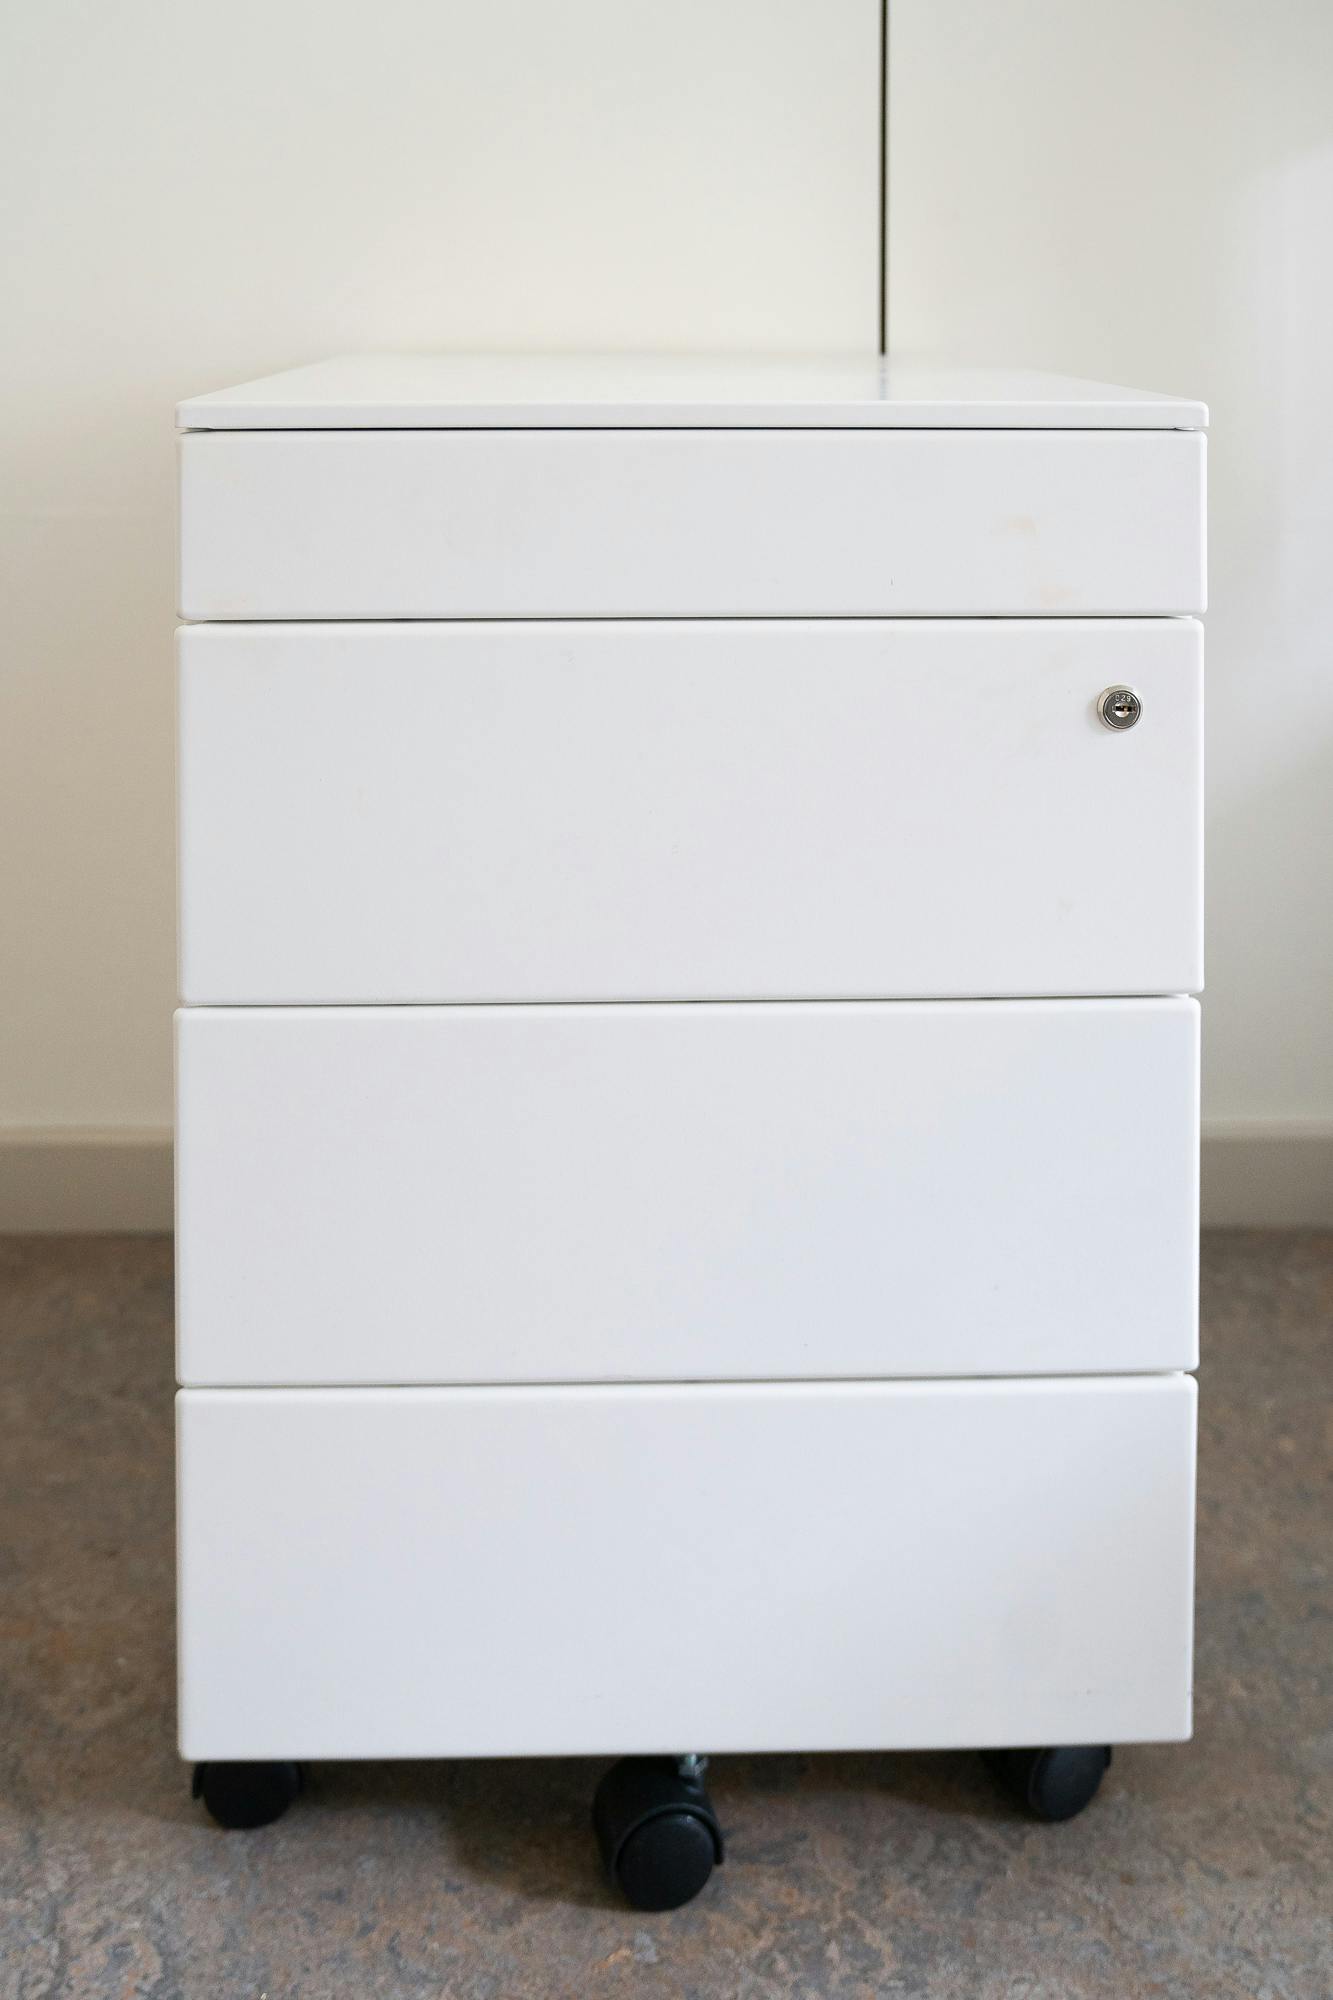 white pedestal with castors - Second hand quality "Storage" - Relieve Furniture